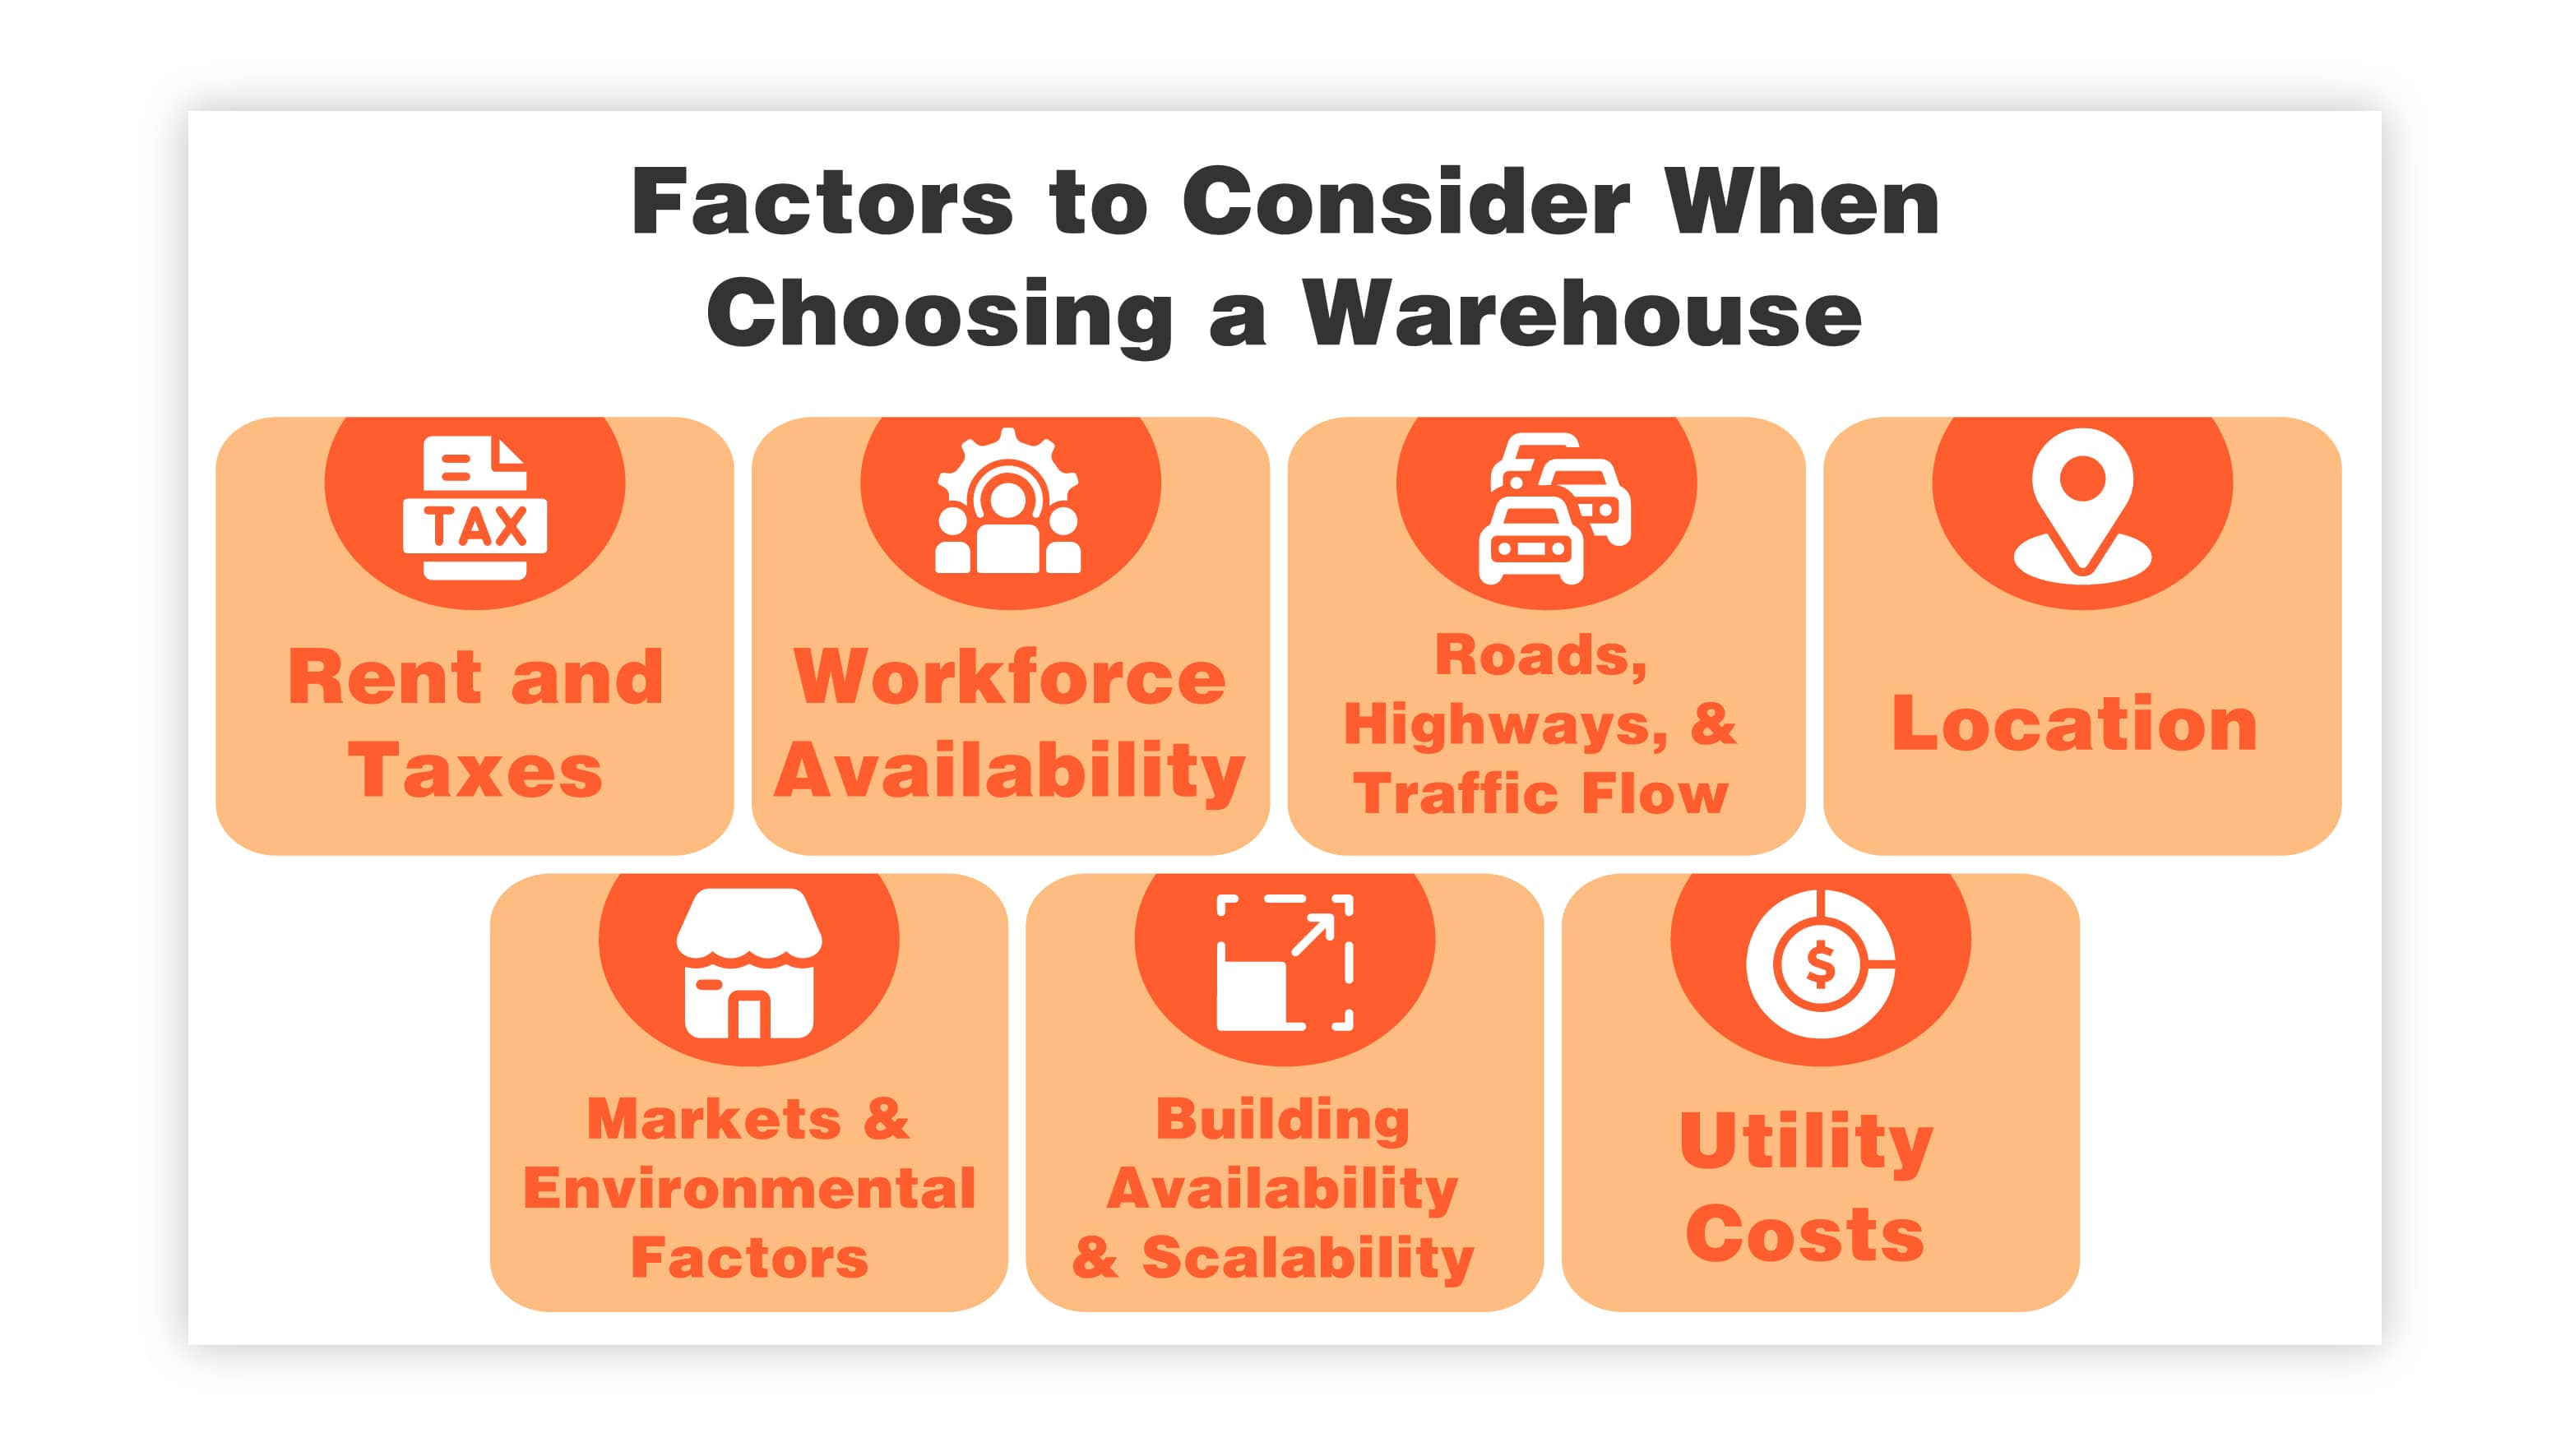 Factors to Consider When Choosing a Warehouse